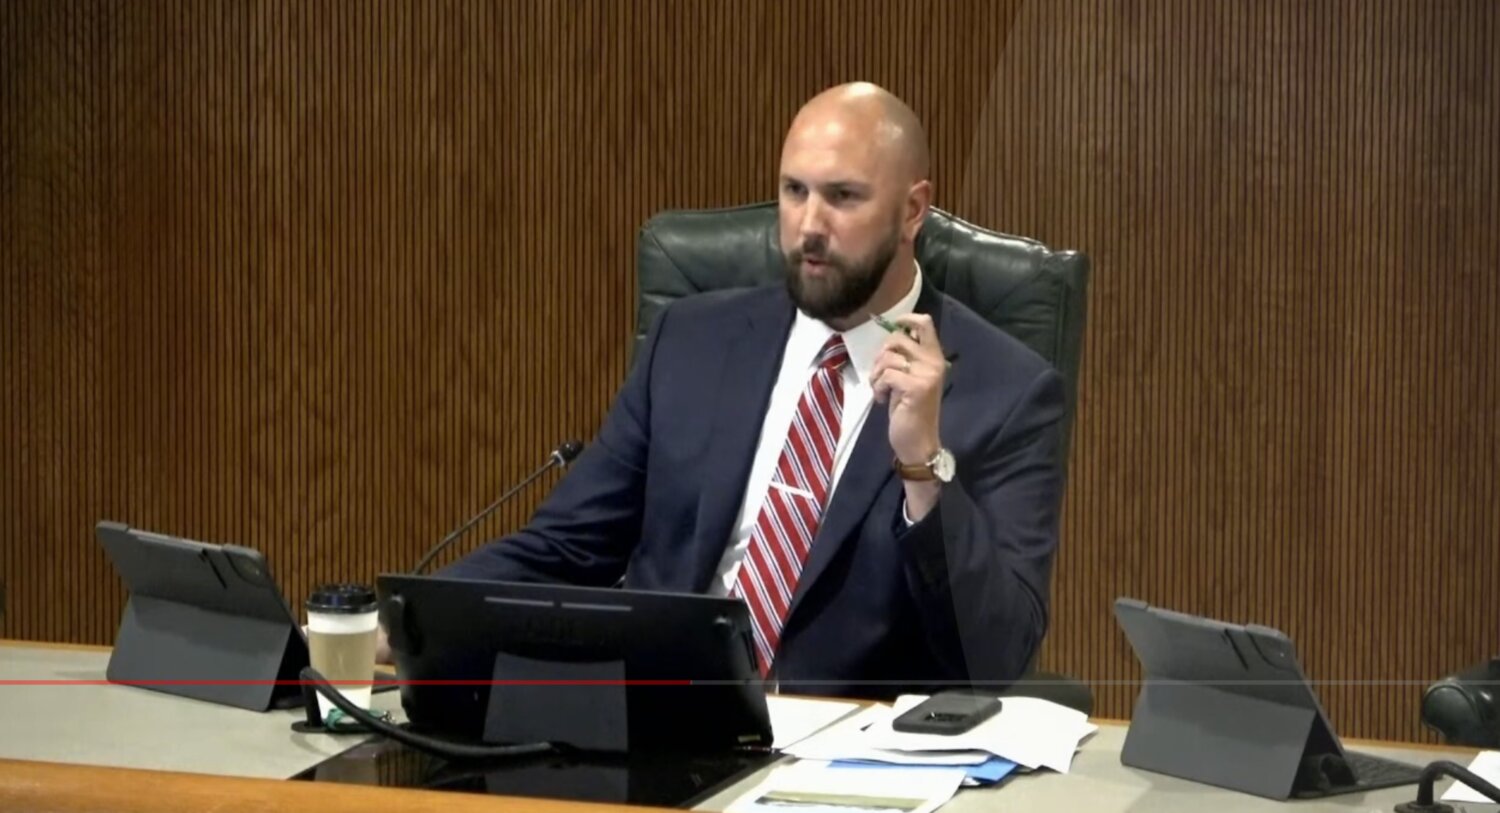 Commissioner Kyle Becker will not run for re-election for Seat #3 on the Apopka City Commission.